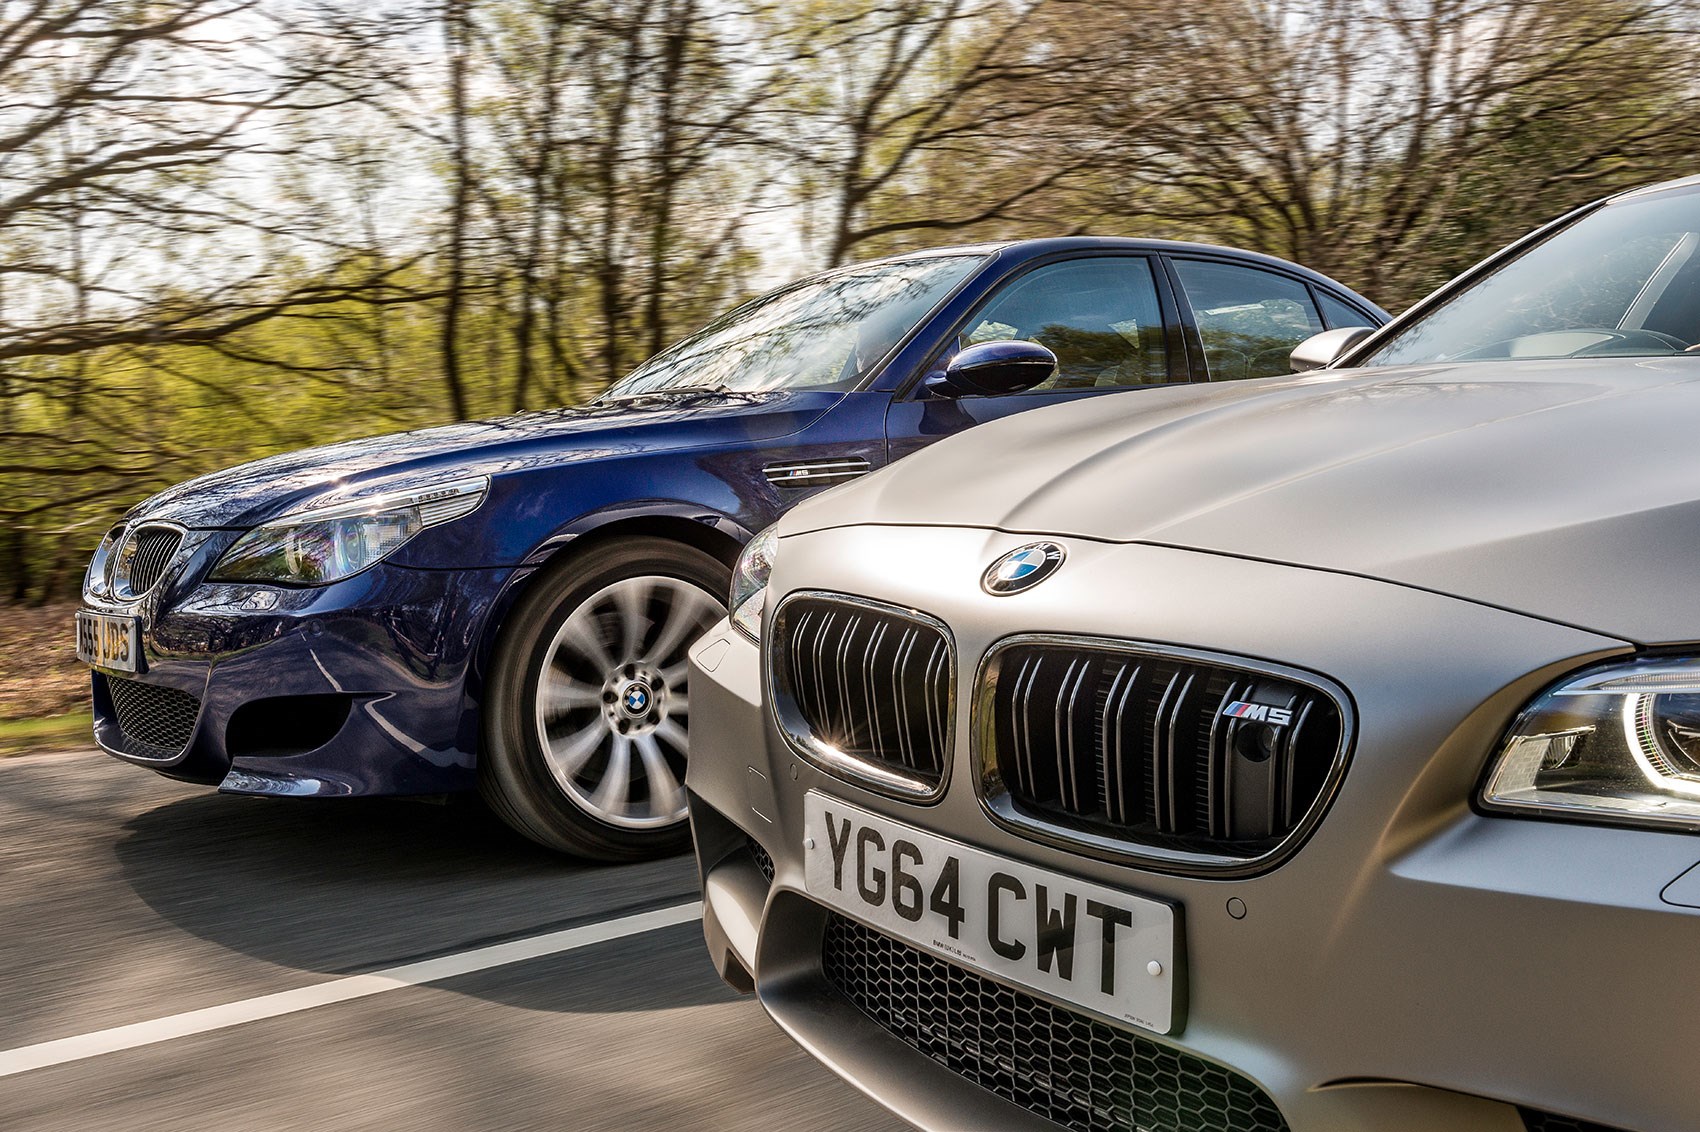 BMW M5 buying guide: driving all of the first five BMW M5 generations